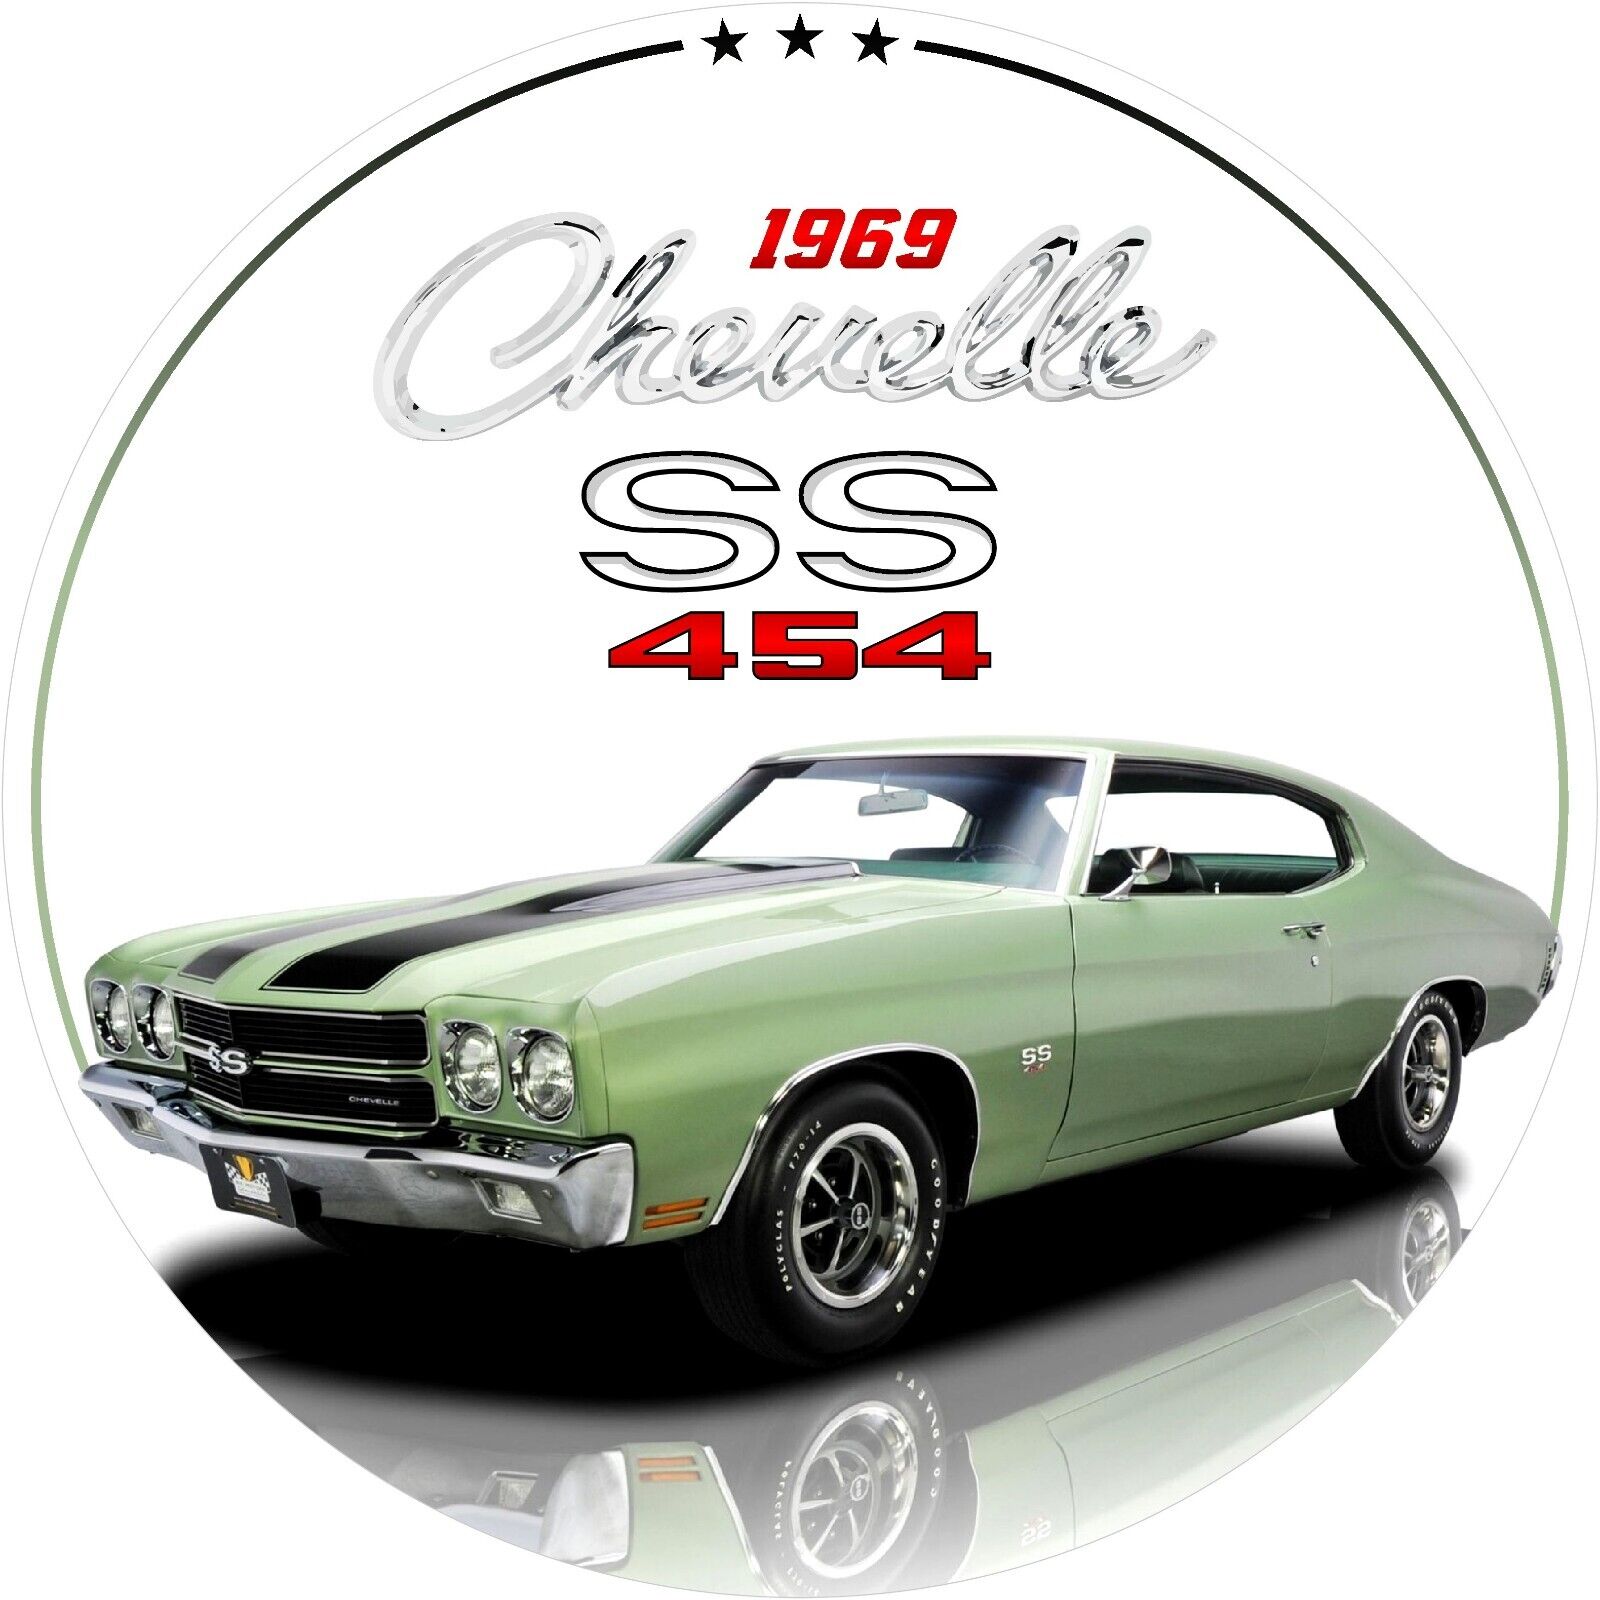 1969 Chevrolet Chevelle SS 454 11.75in ROUND METAL SIGN